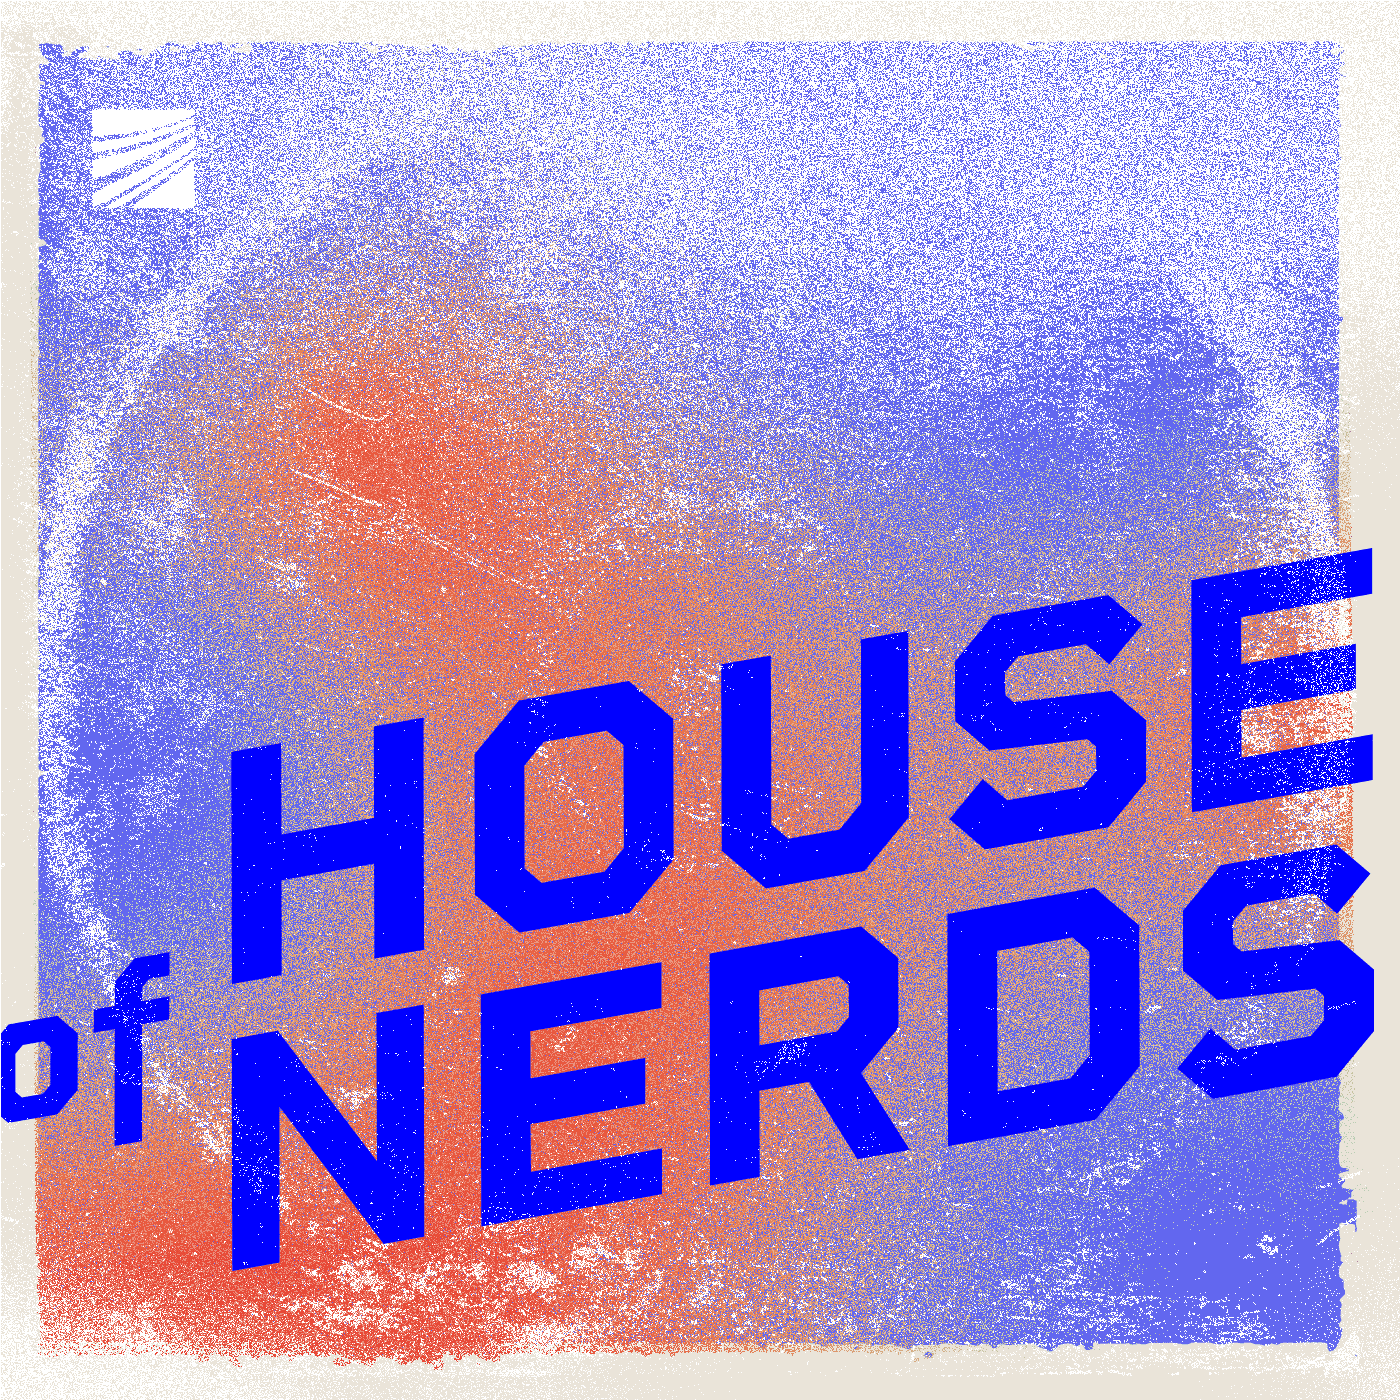 House of Nerds